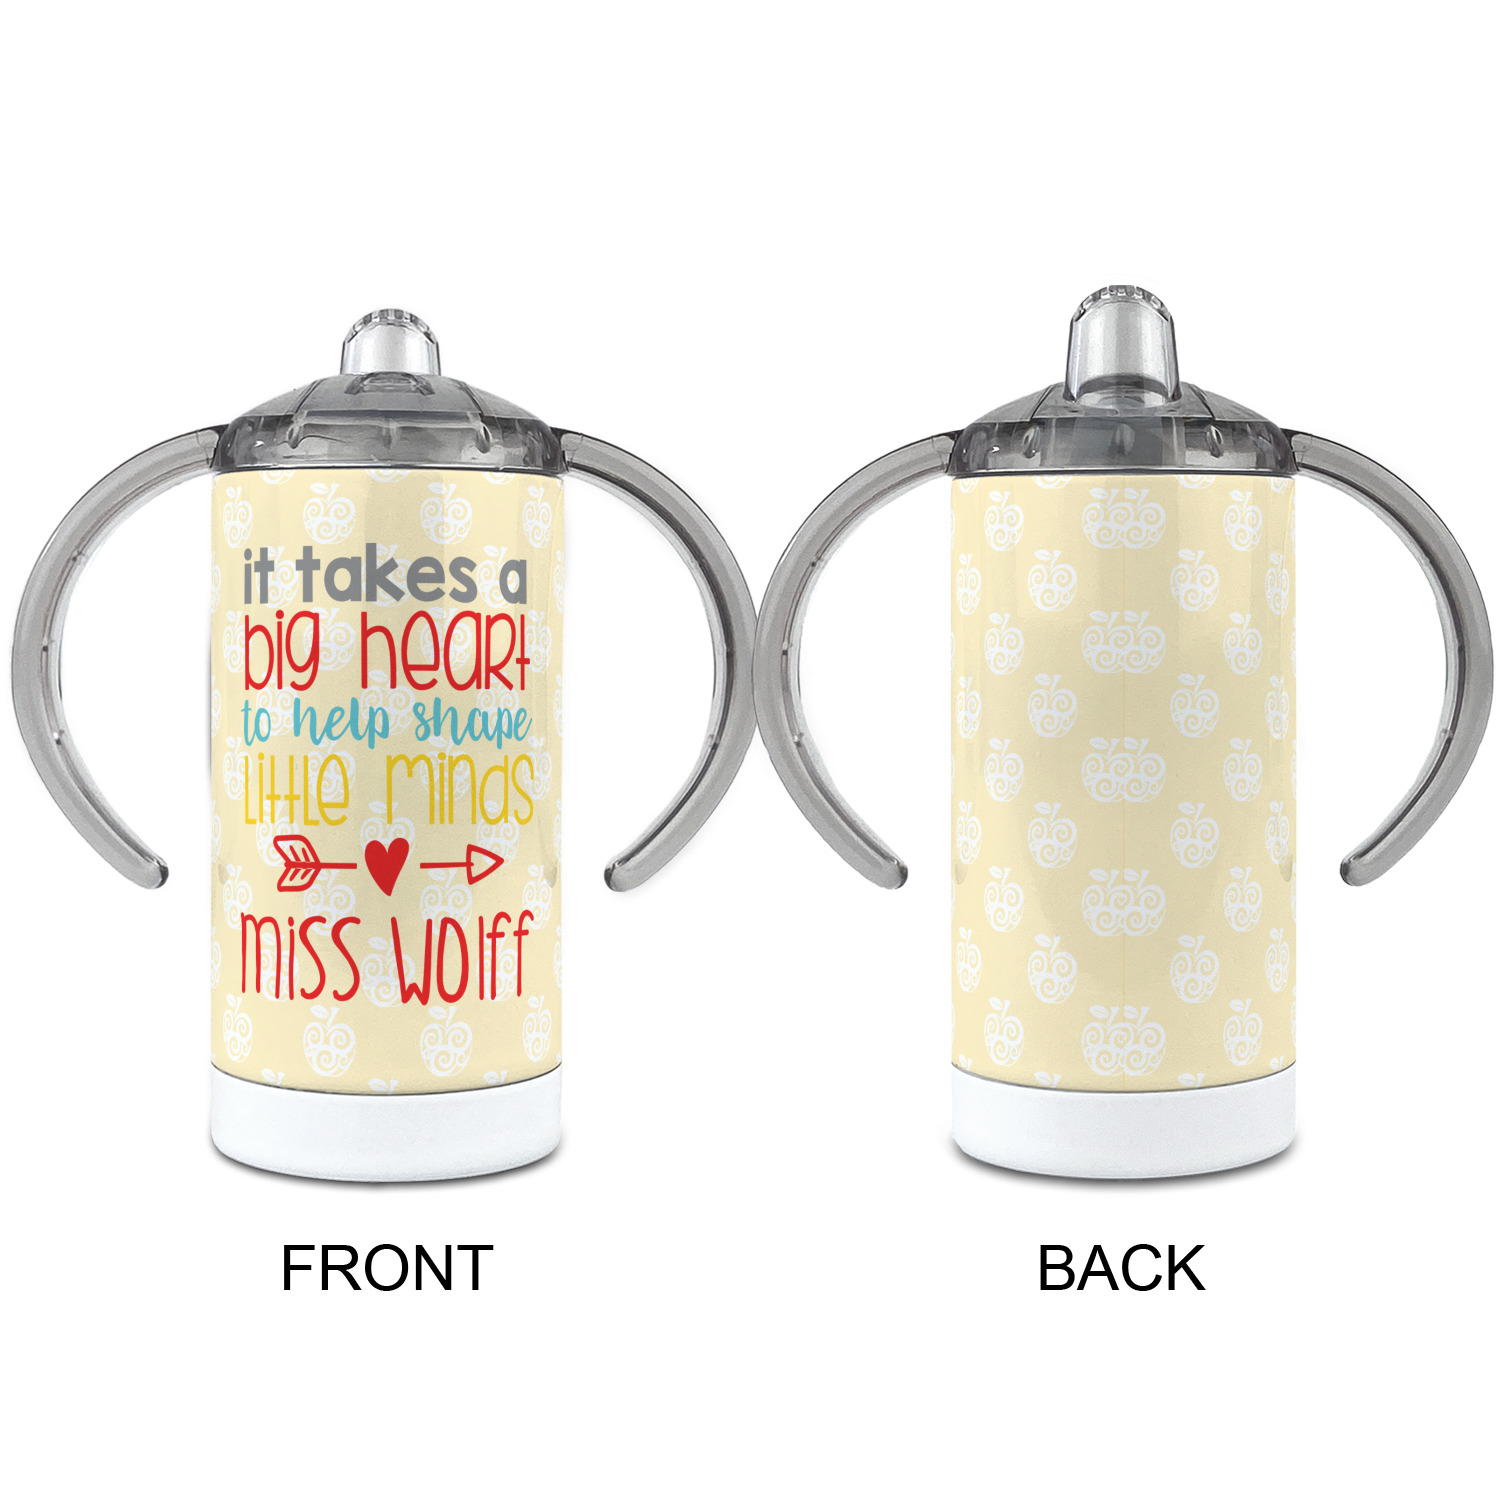 Wholesale Sippy Cups - 12 oz, Bright Prints, Durable